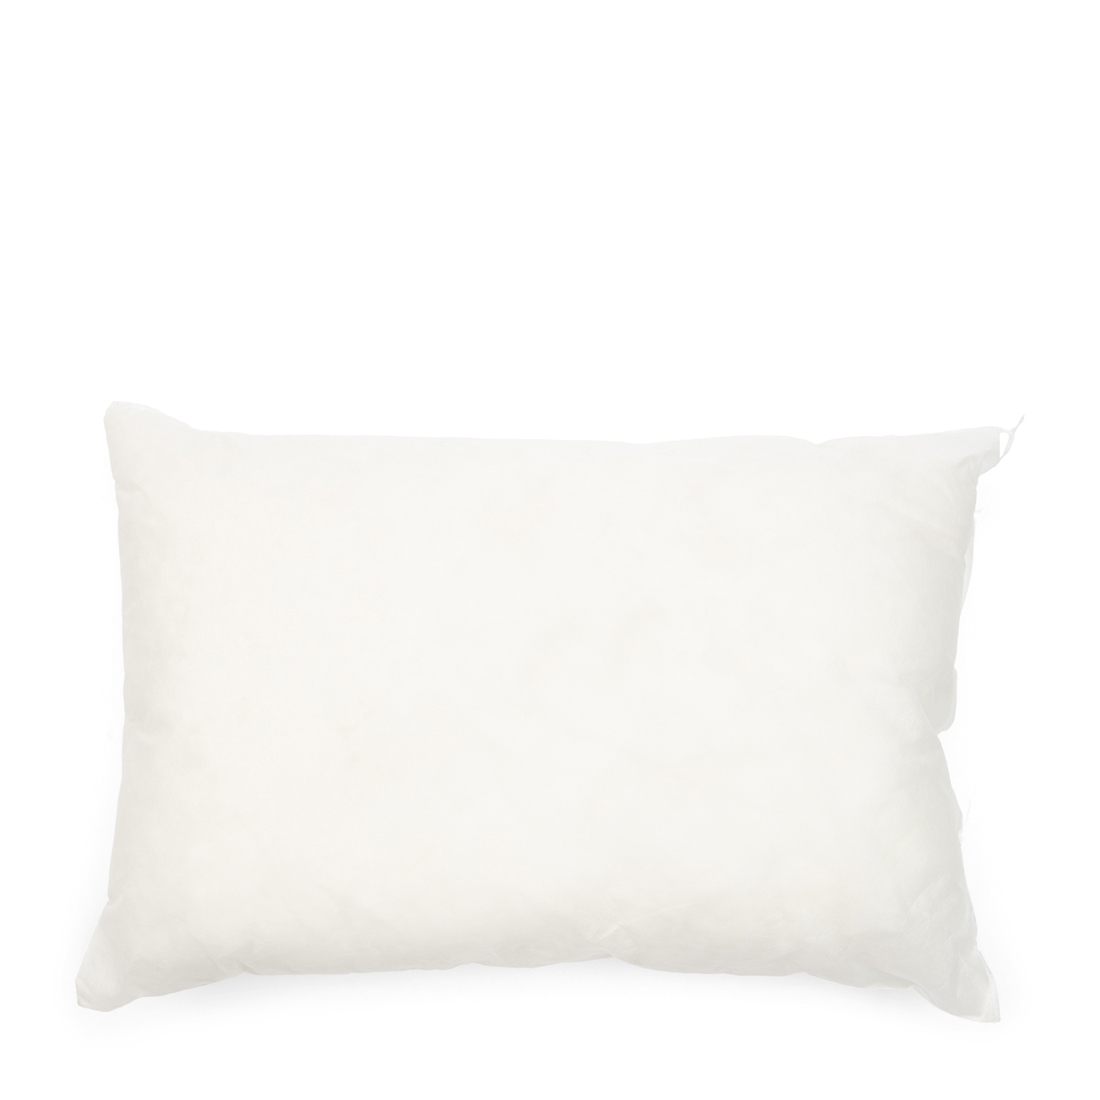 RM Recycled Inner Pillow 65x45